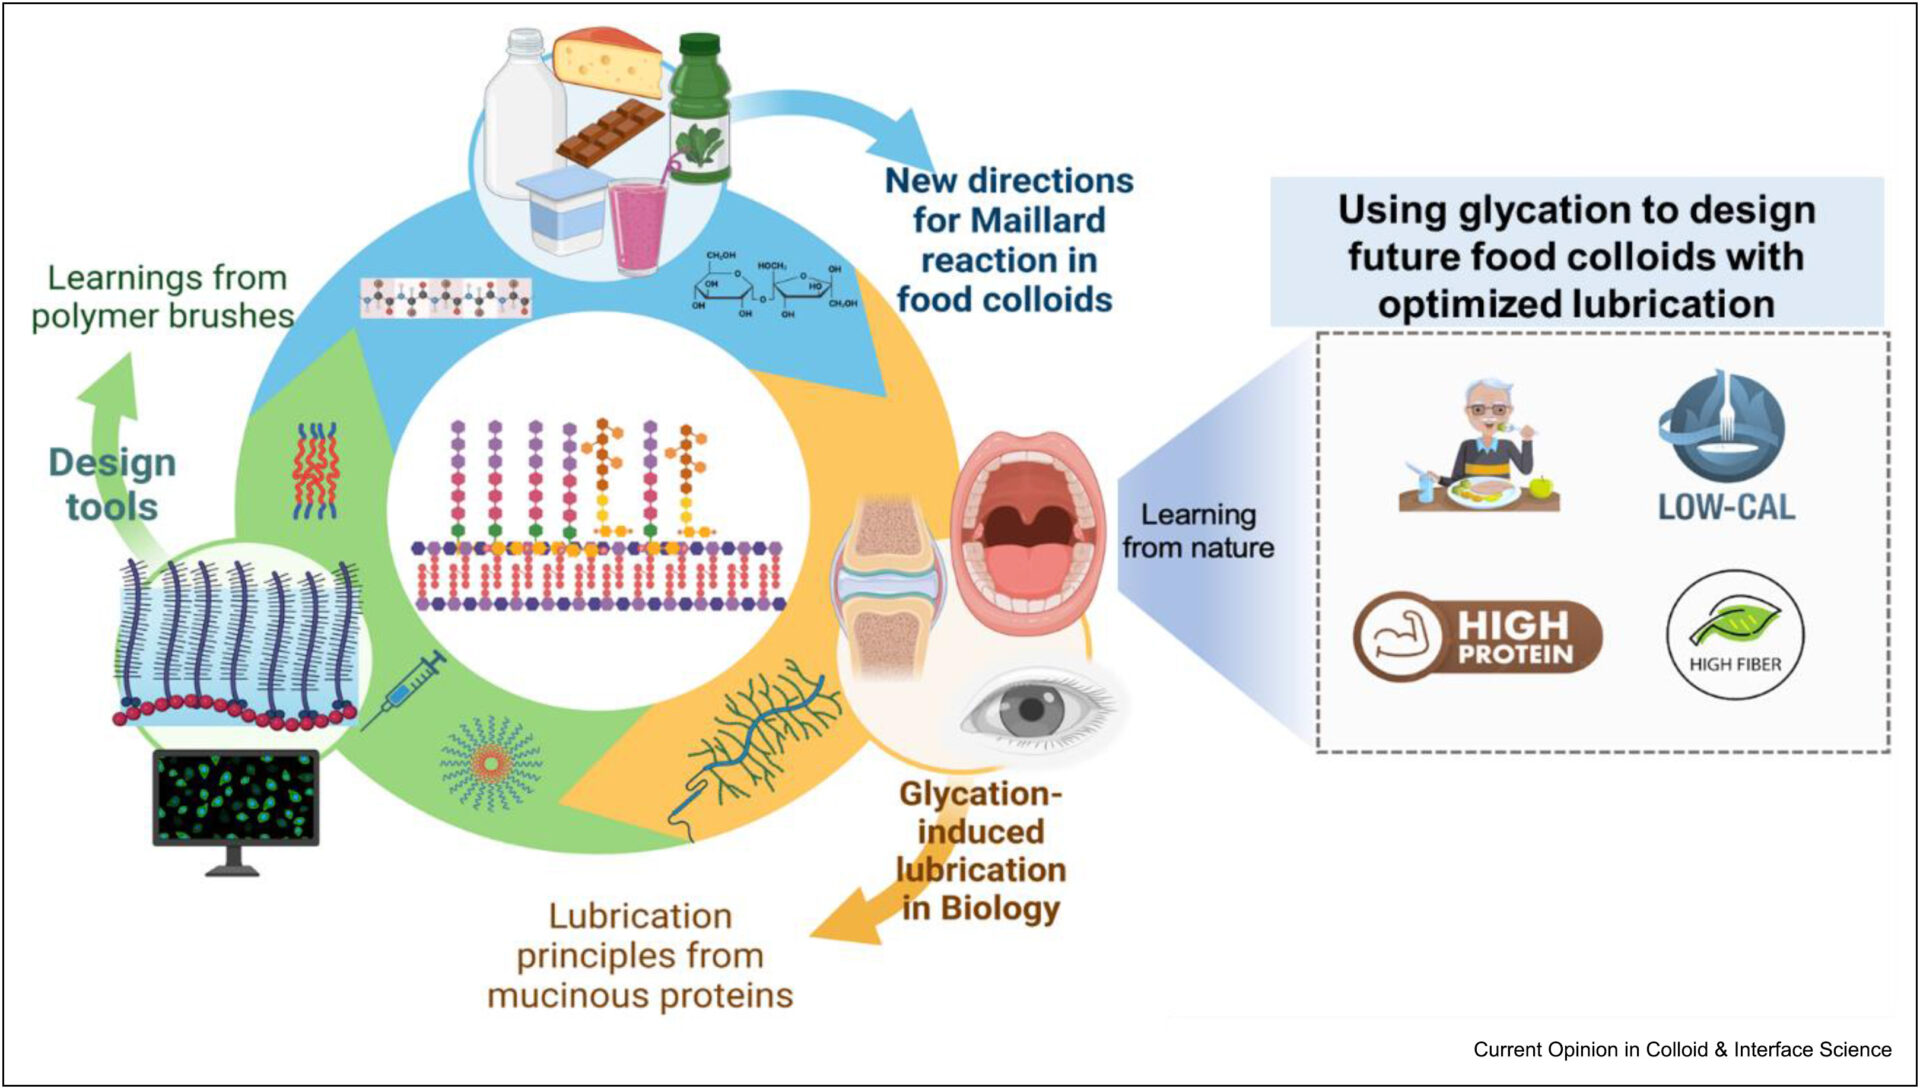 New review paper on glycation to address sensorial issues in alternative proteins